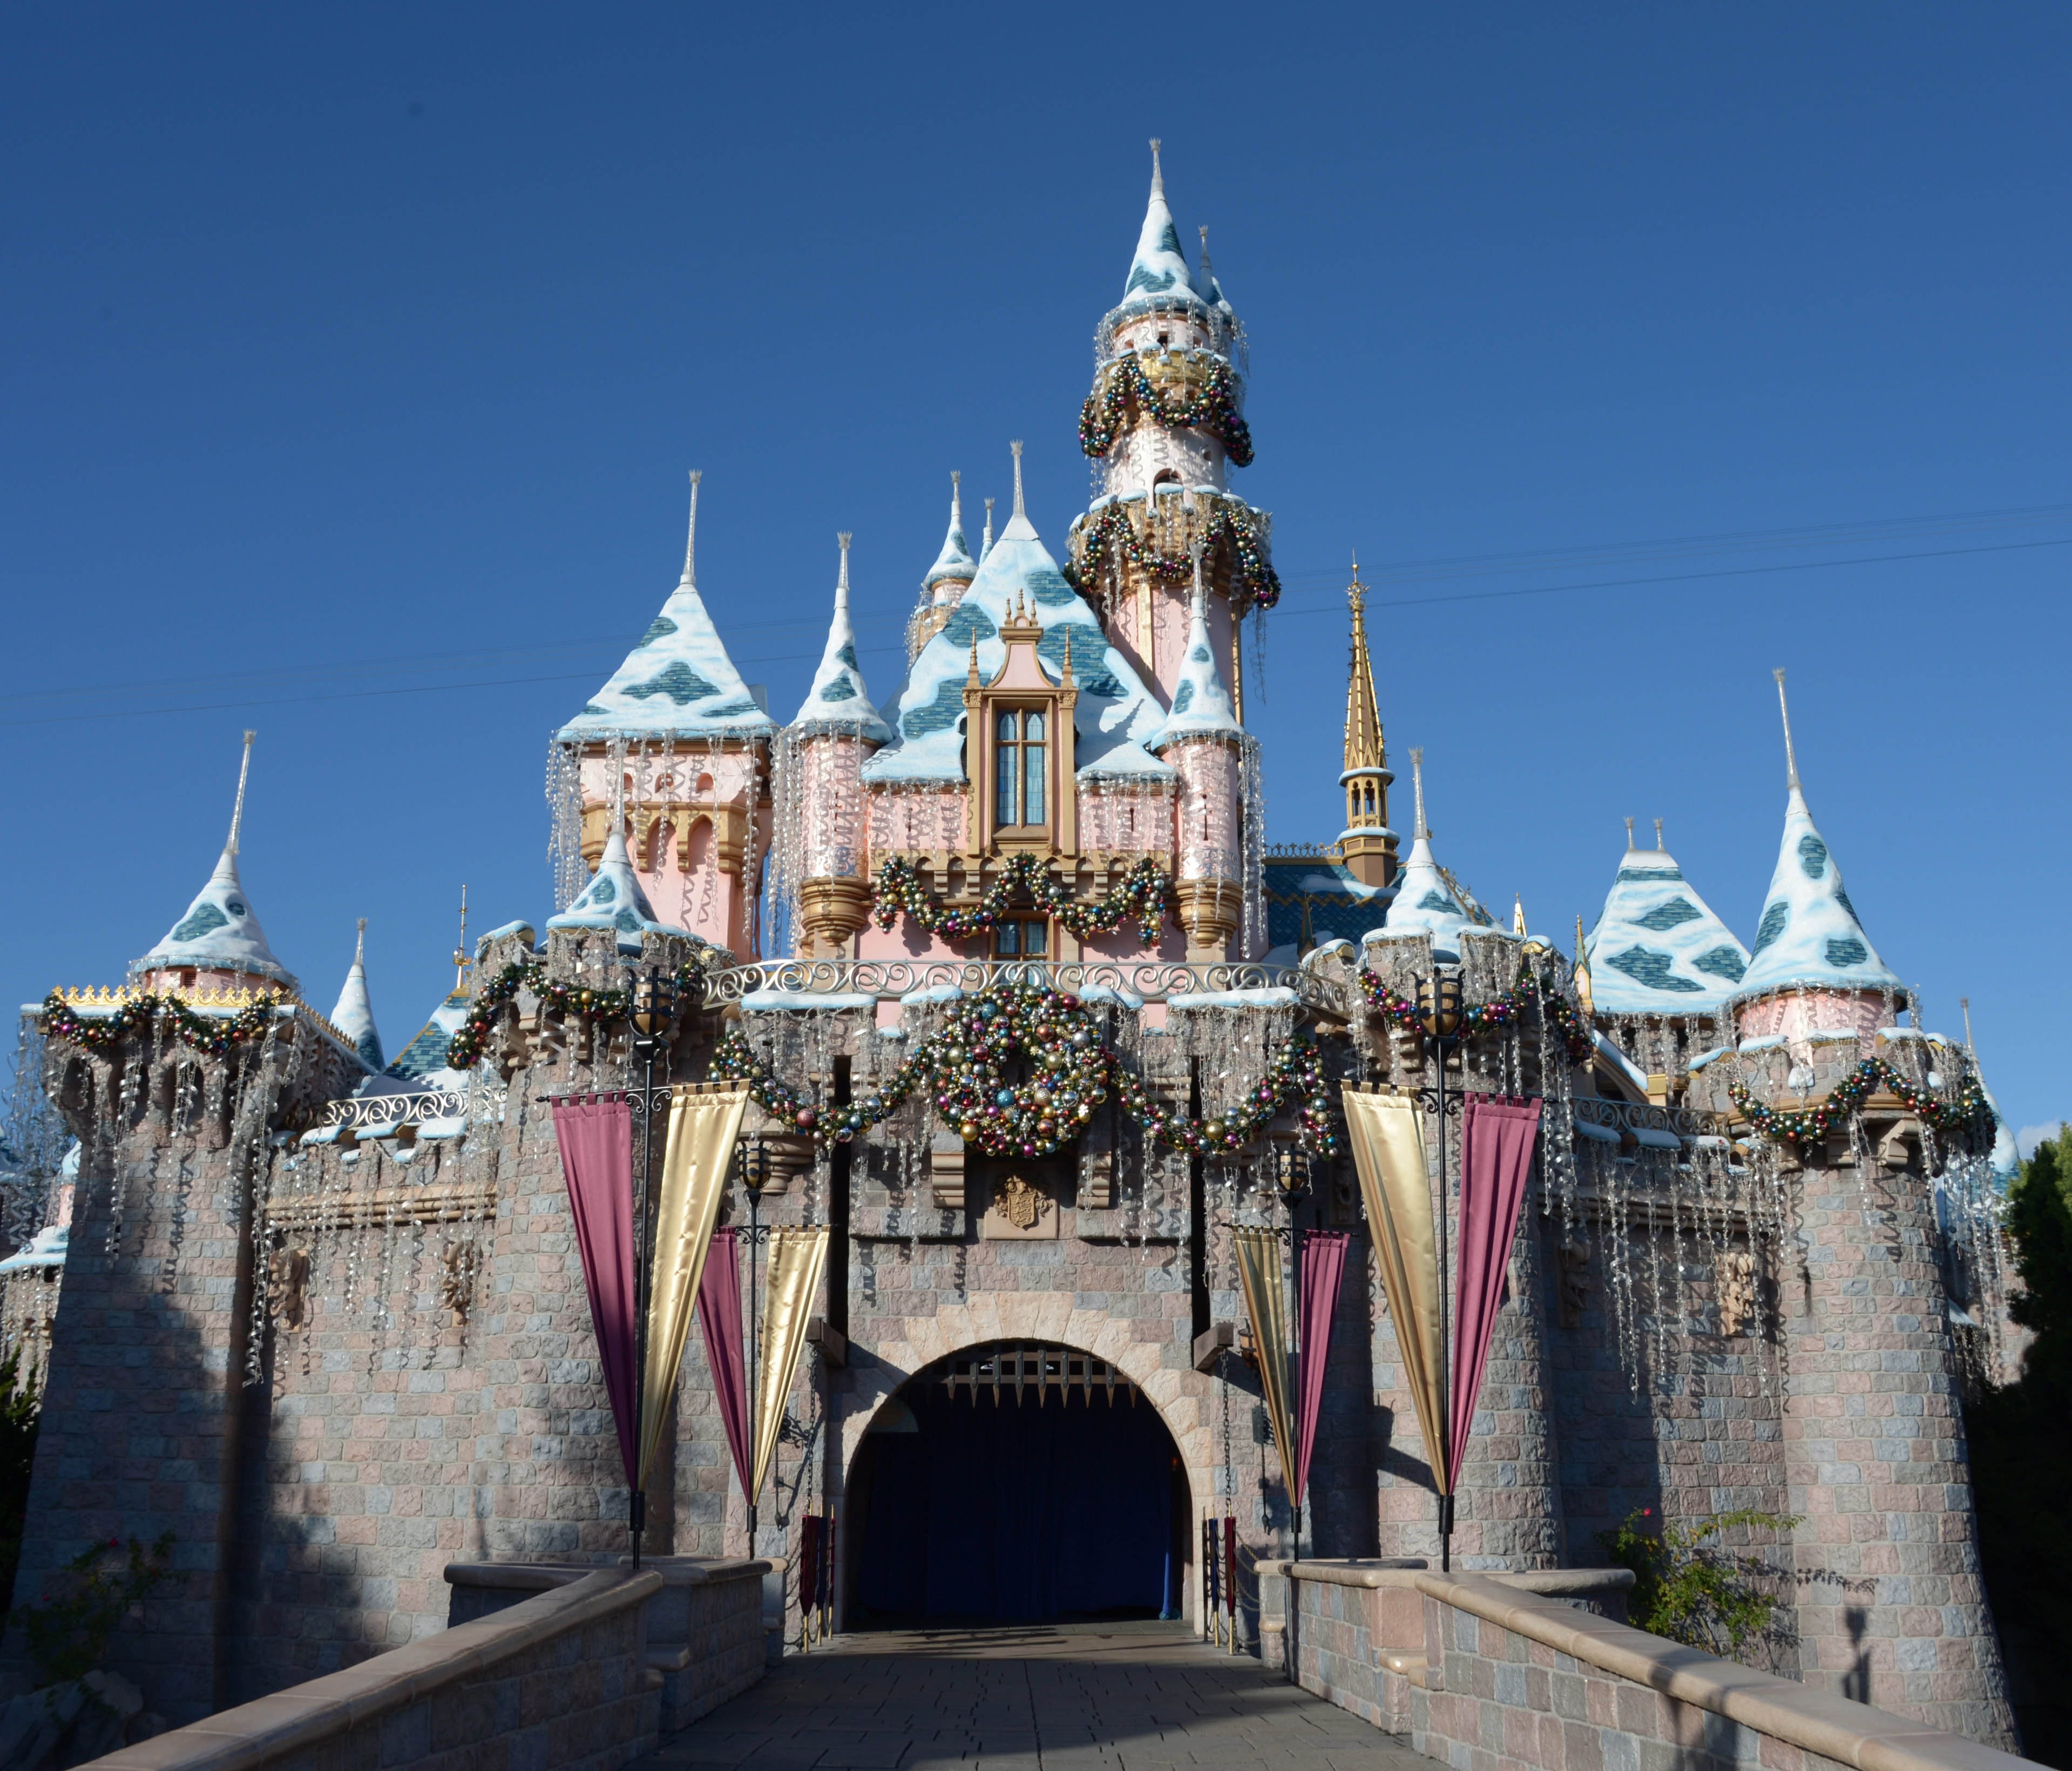 Prices are going up at Disneyland and California Adventure theme parks.